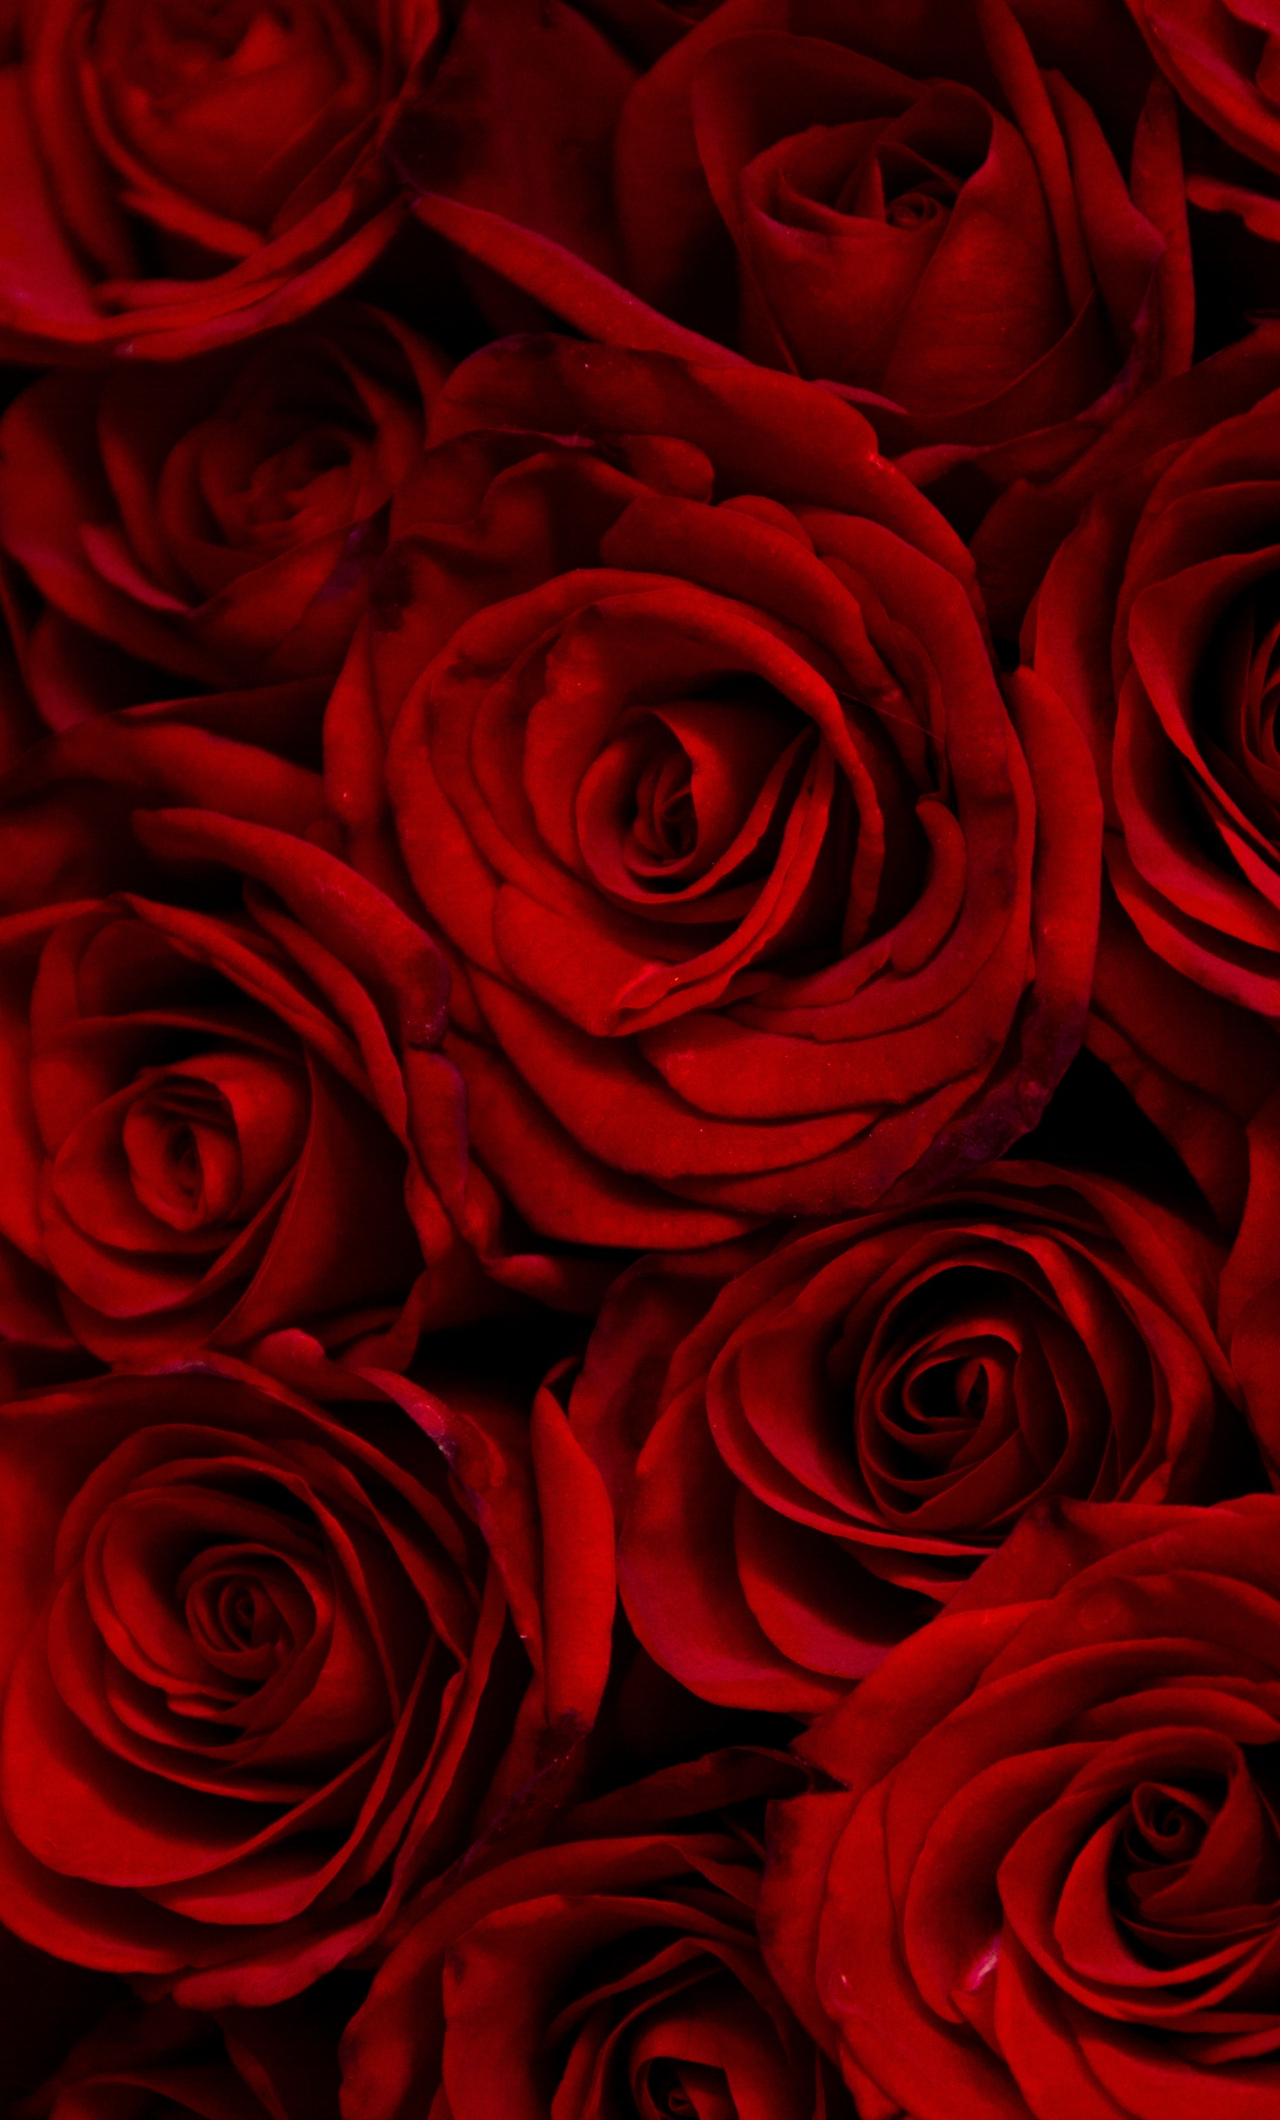 Download Dark Red Roses Decorative 1280x21 Wallpaper Iphone 6 Plus 1280x21 Hd Image Background 9700